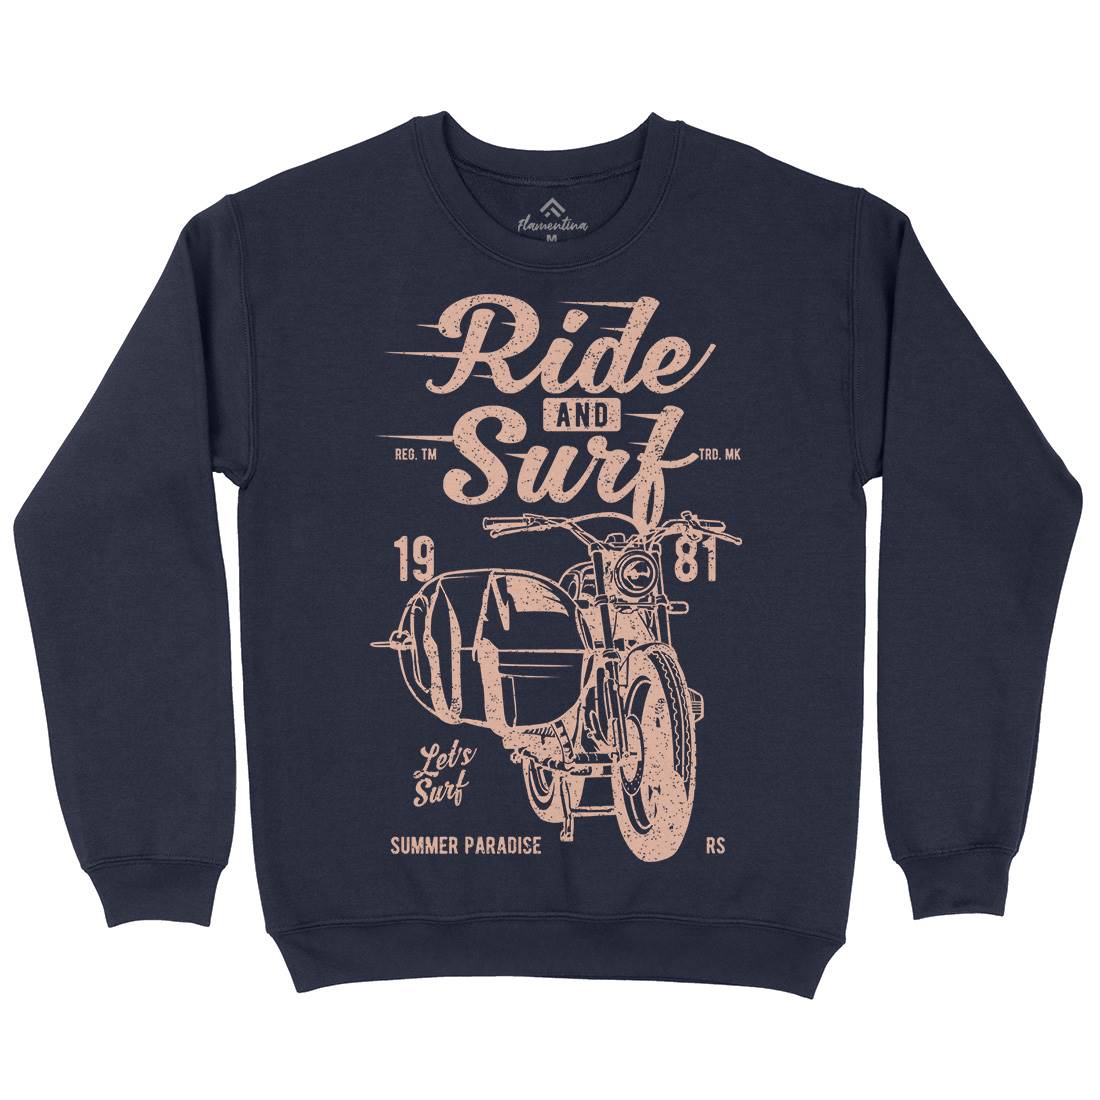 Ride And Mens Crew Neck Sweatshirt Surf A742